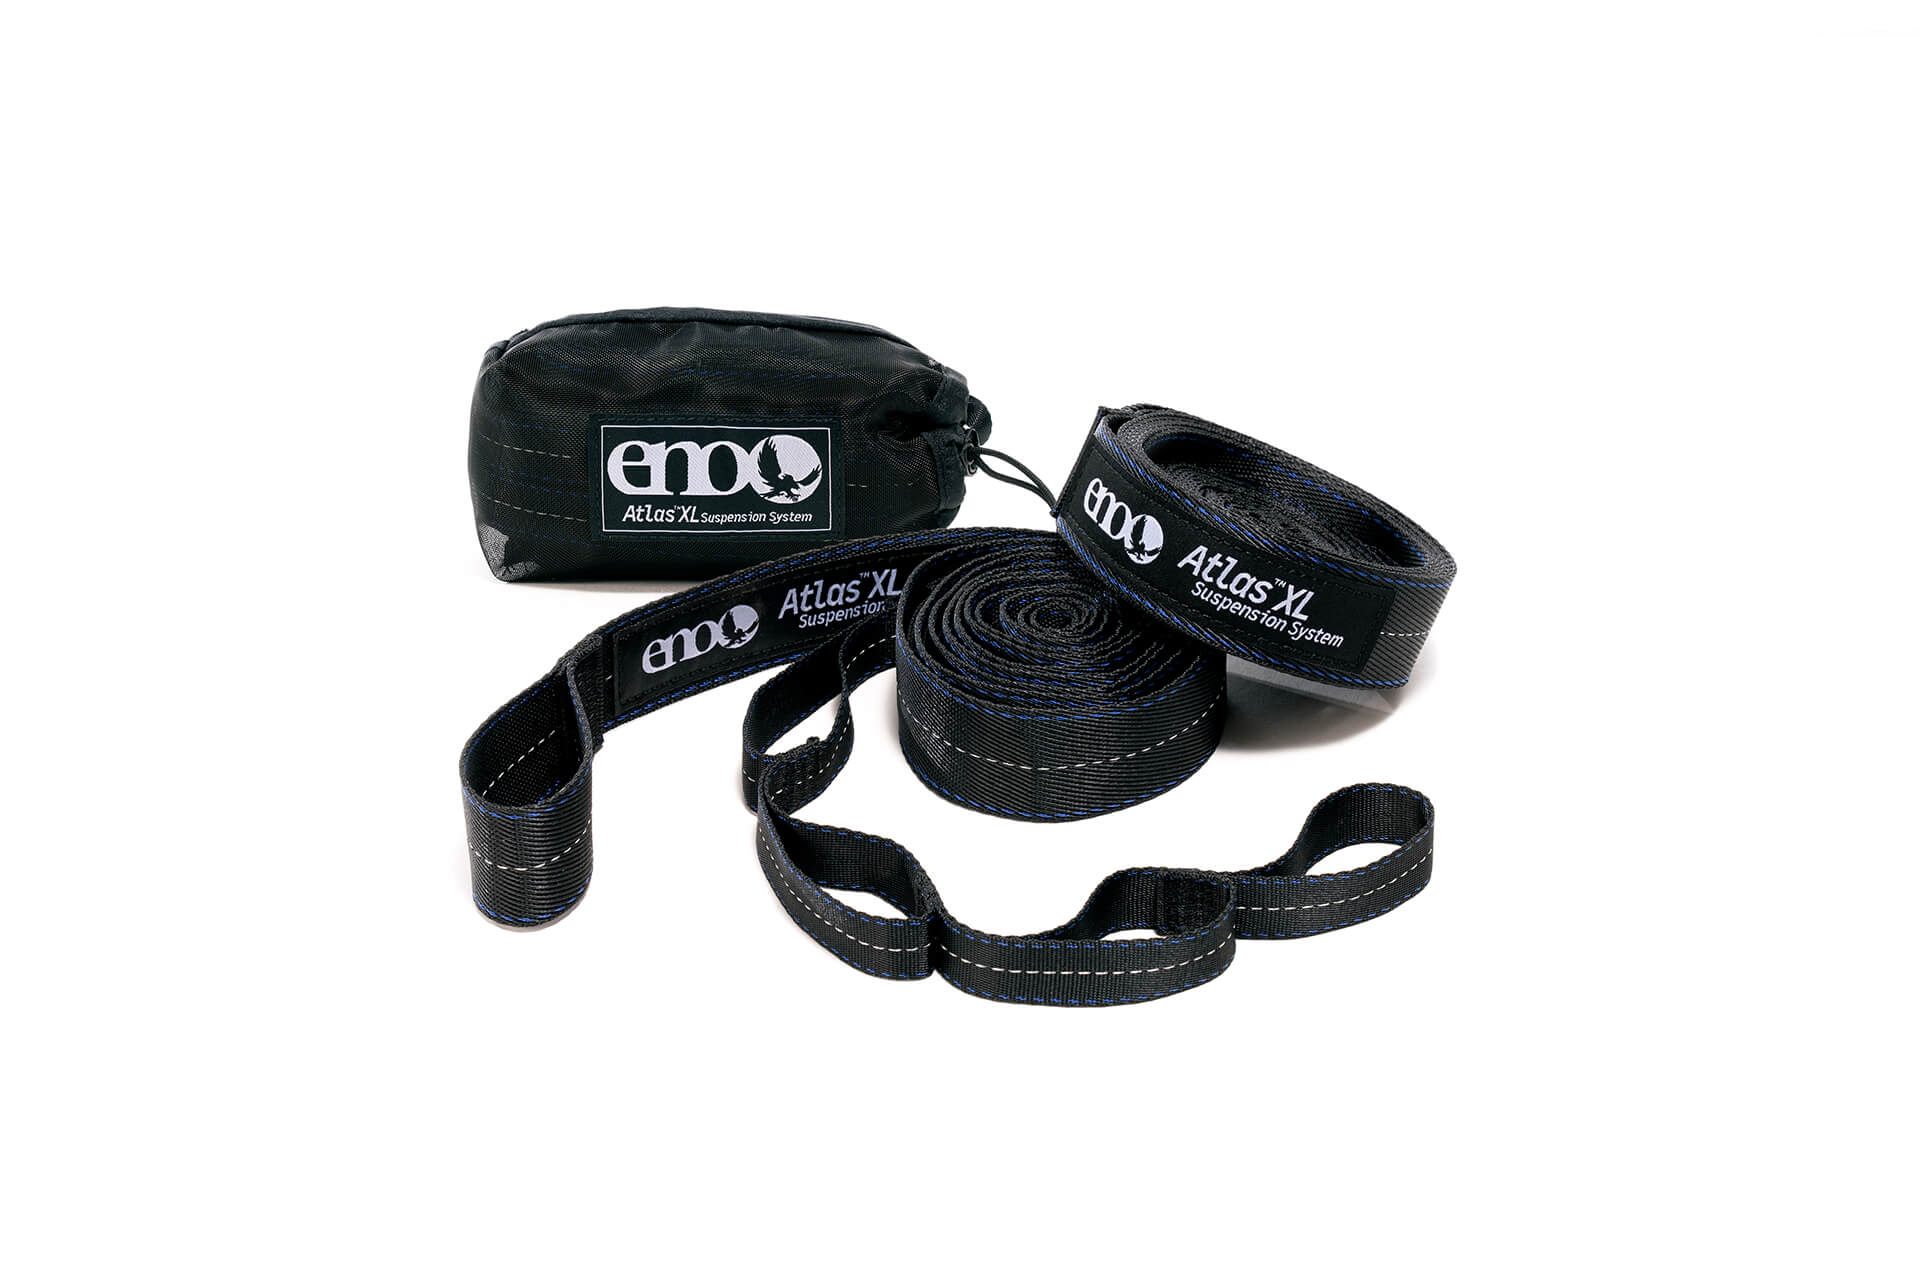 Eagles Nest Outfitters, Inc. Suspension Systems Atlas™ XL Hammock Straps